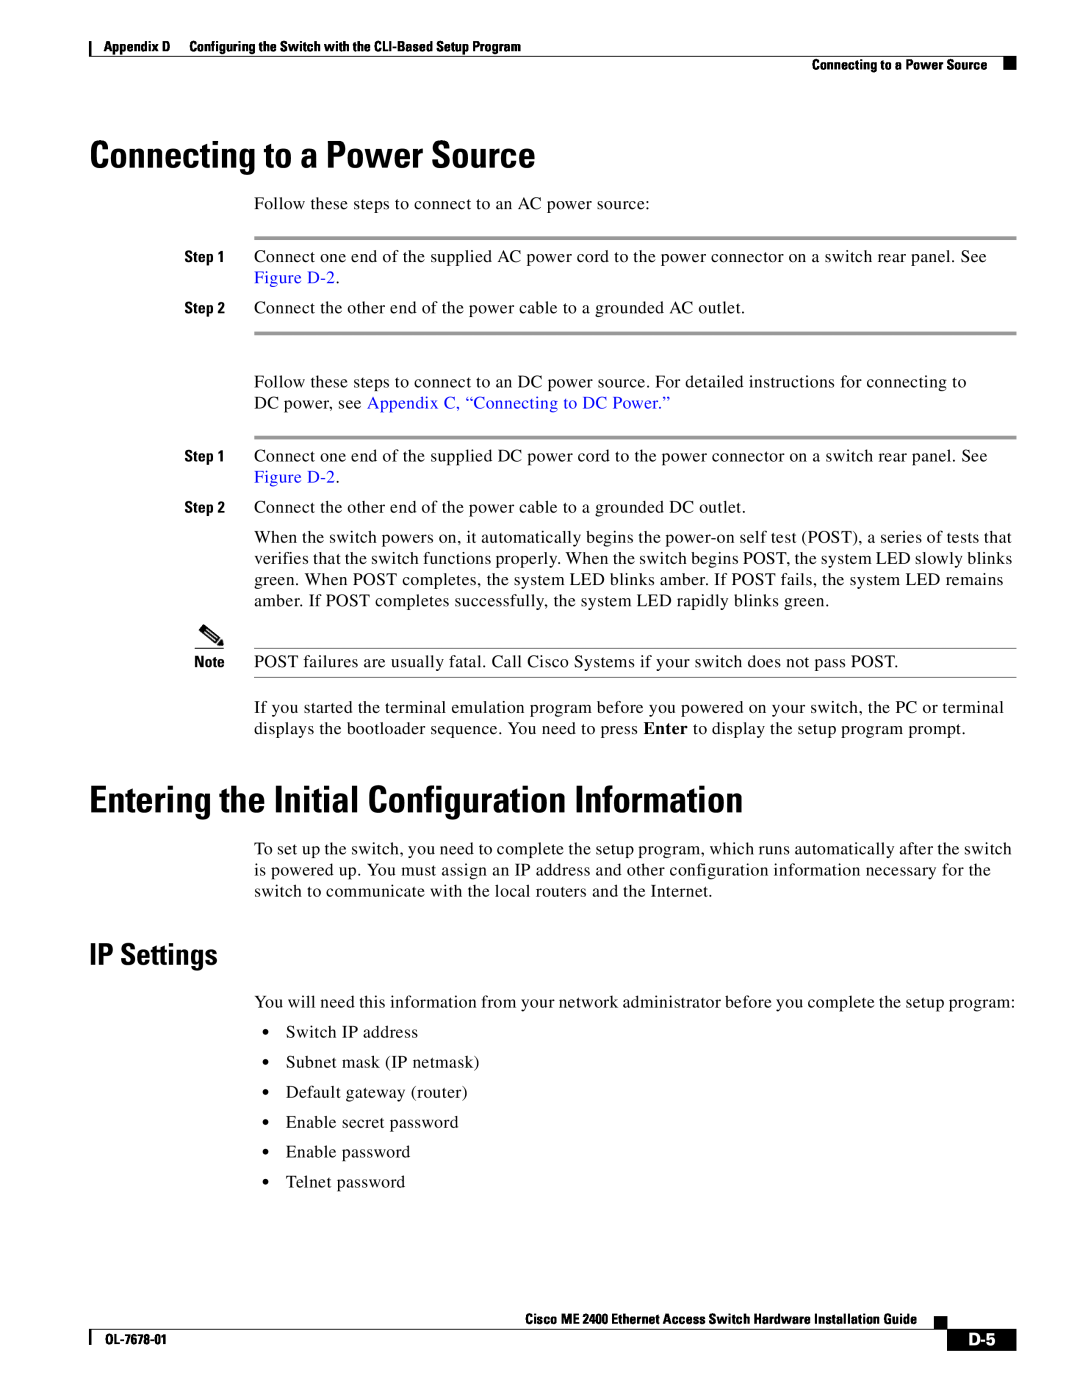 Cisco Systems ME 2400 manual Connecting to a Power Source, Entering the Initial Configuration Information, IP Settings 